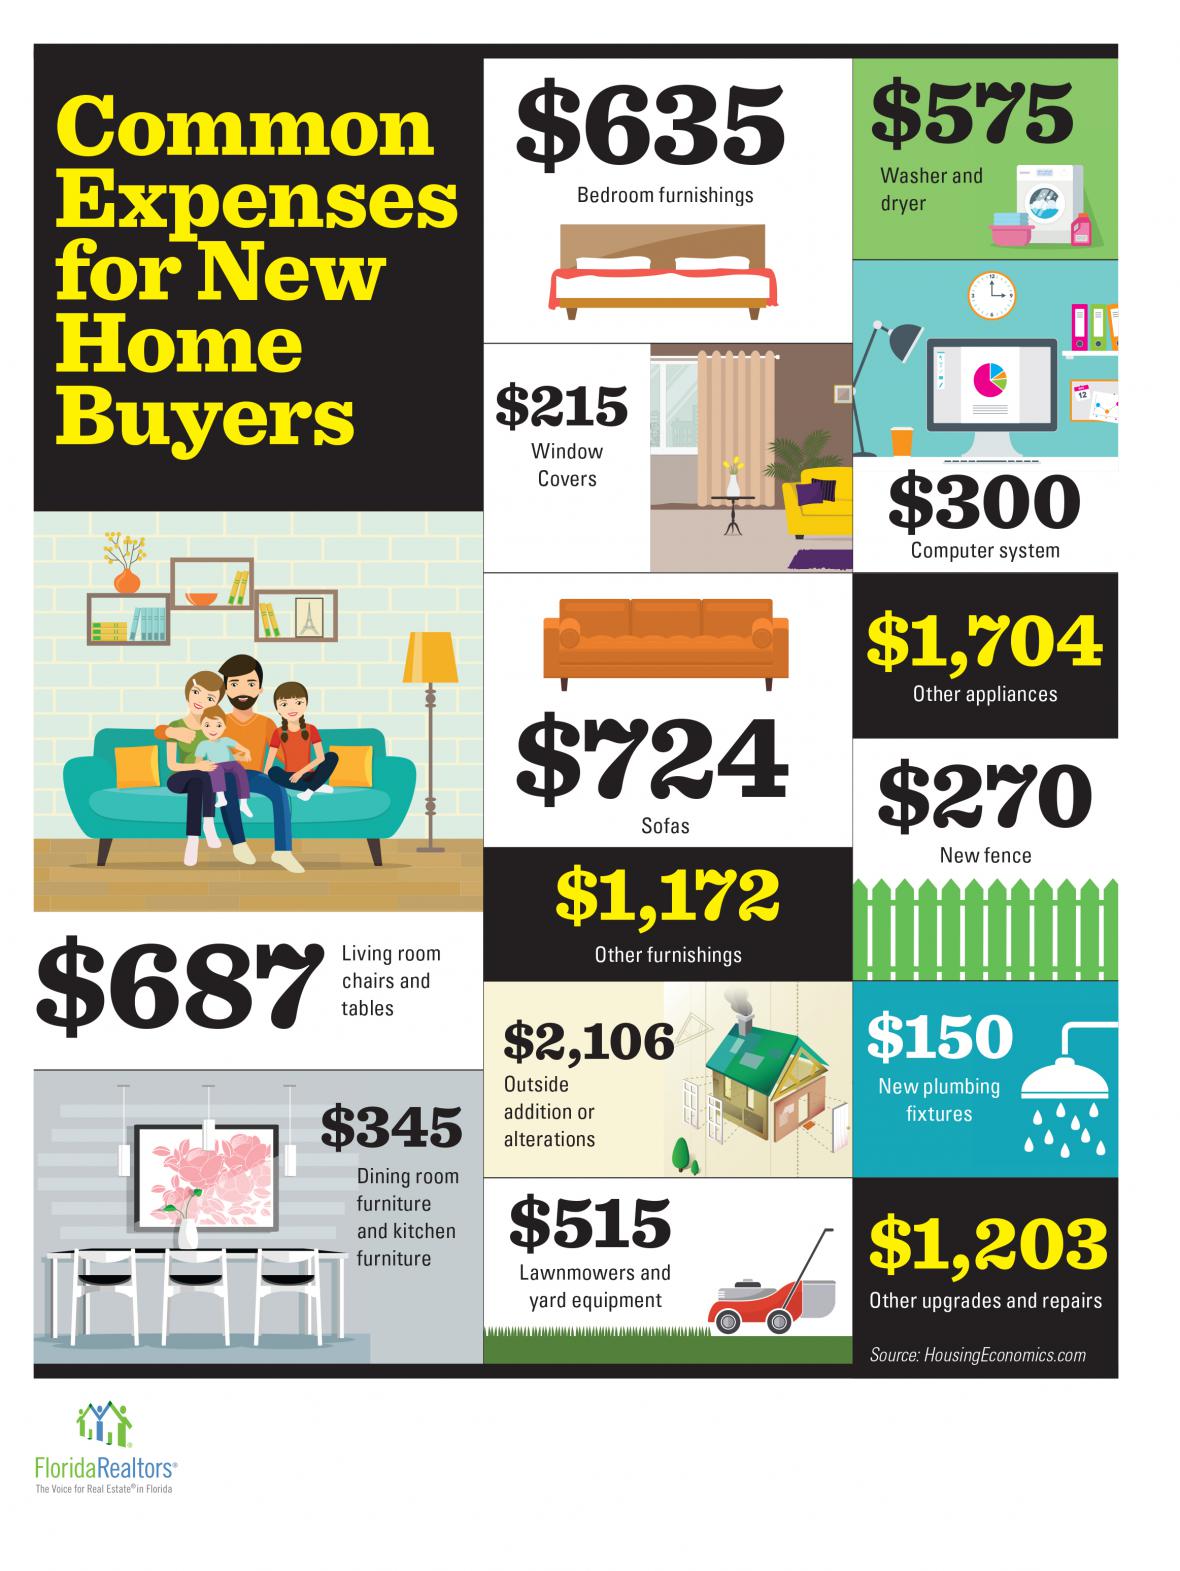 Expenses for New Home Buyers